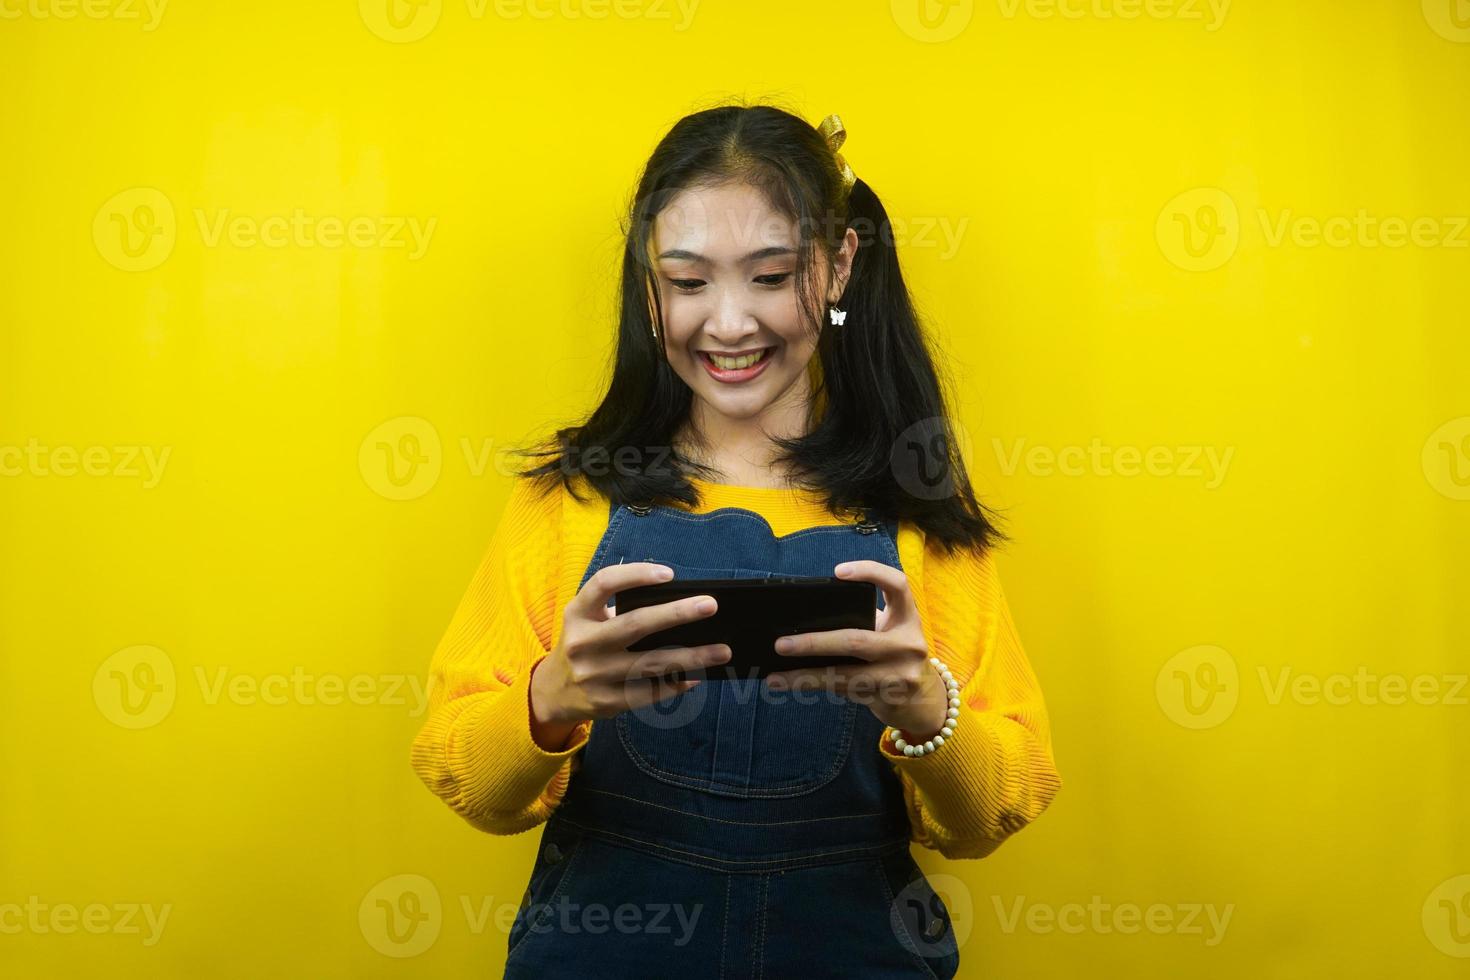 Pretty and cute young woman cheerful, playing game, promoting something, advertisement, isolated photo